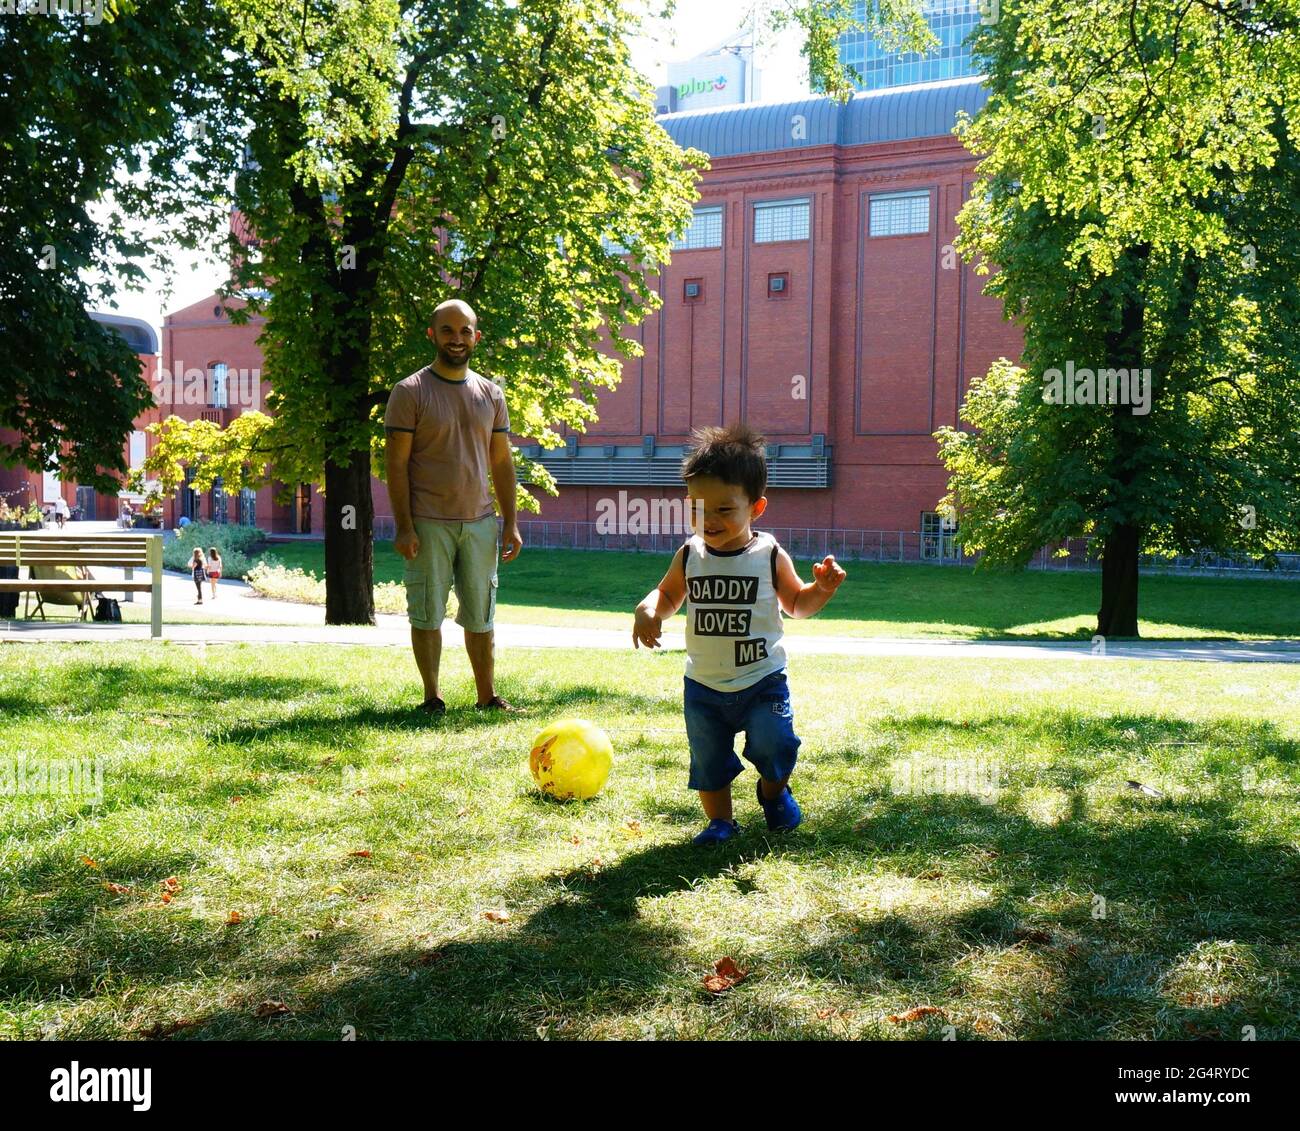 POZNAN, POLAND - Oct 20, 2015: Man and a toddler boy standing on grass at a park Stock Photo